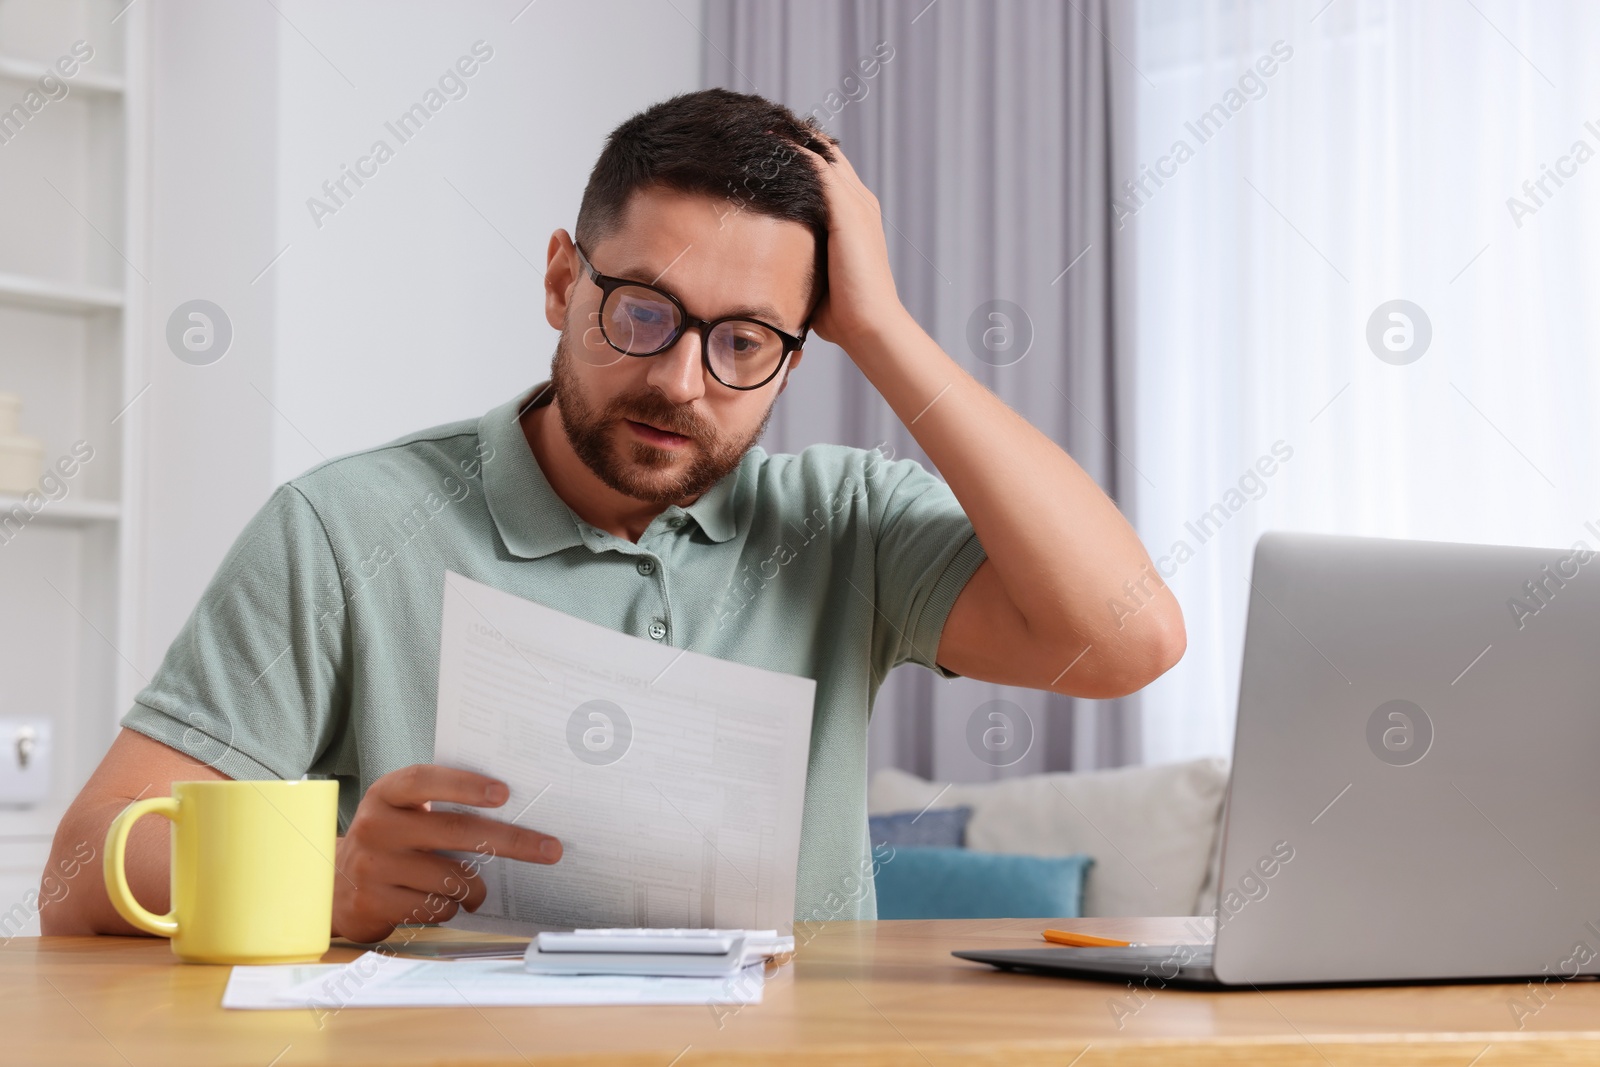 Photo of Man doing taxes at table in room